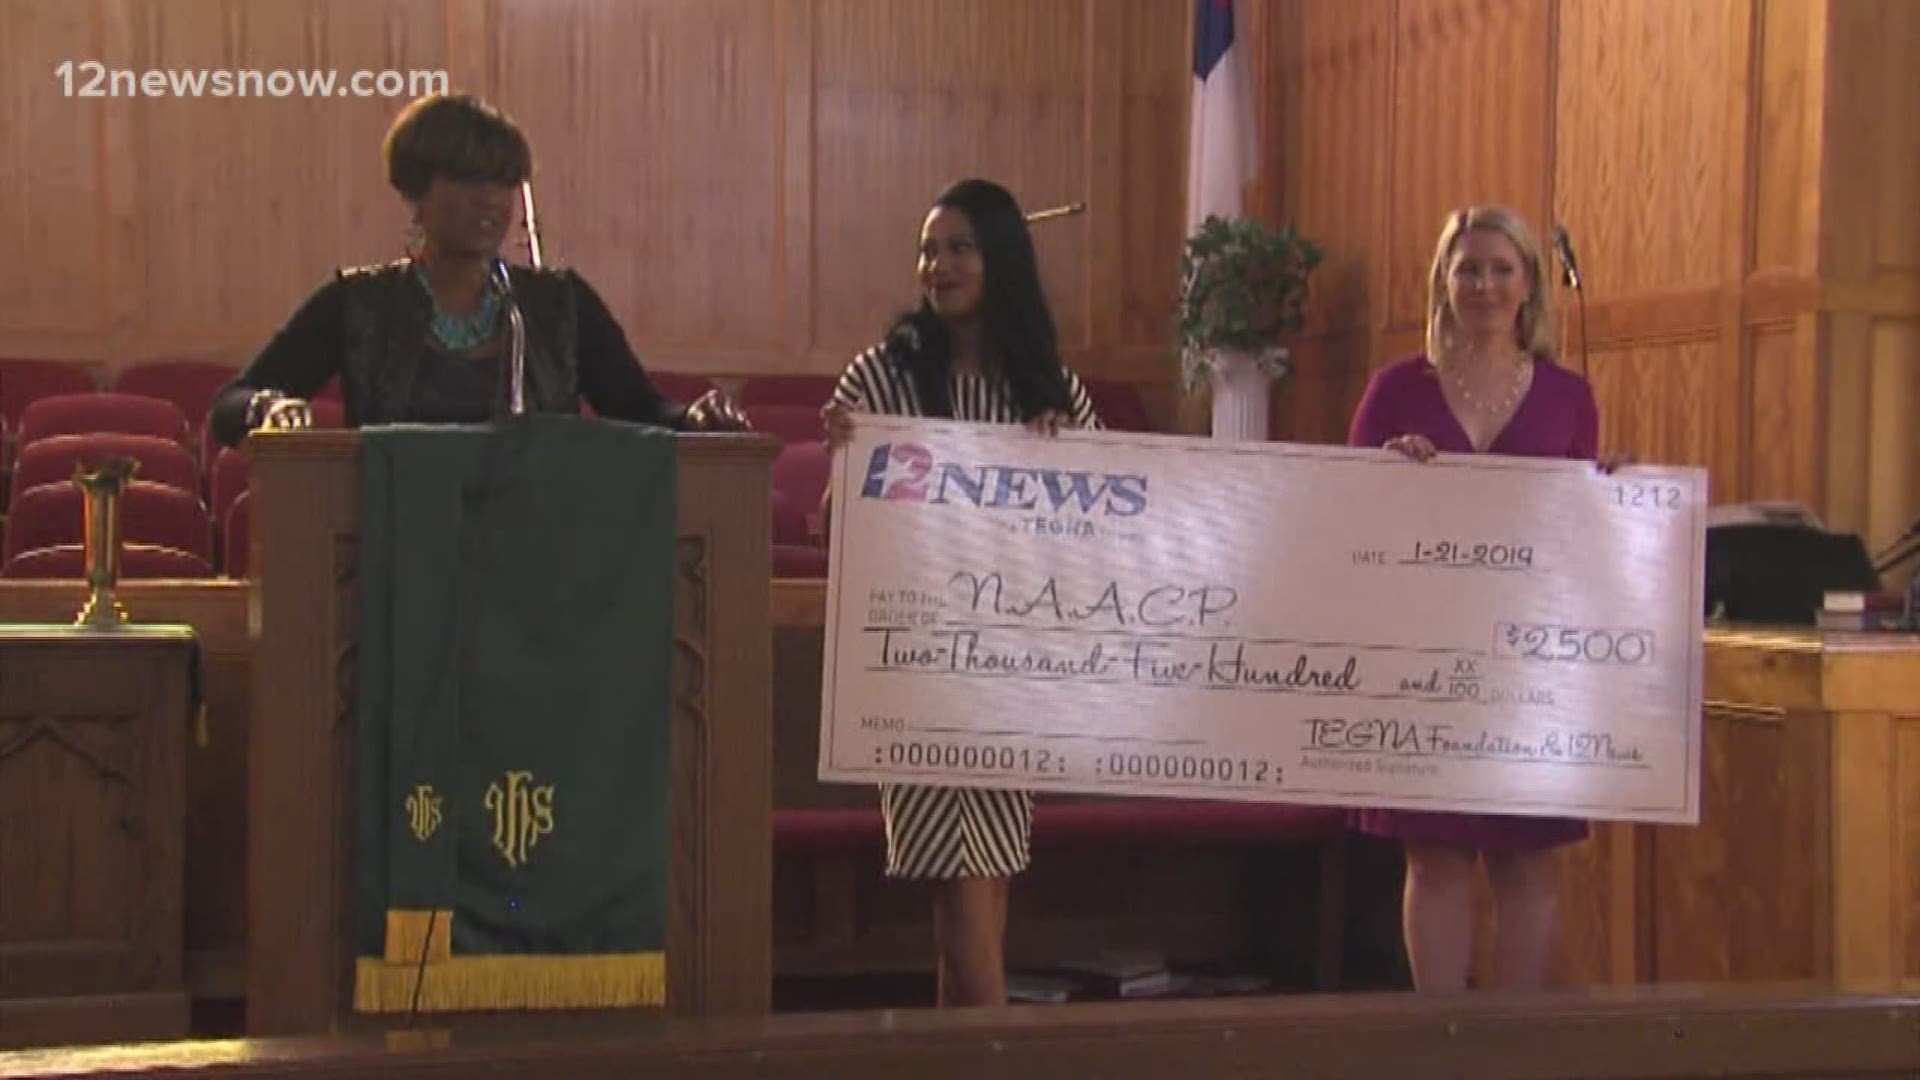 TEGNA, 12News' parent company, donated $2,500 to the Beaumont chapter of the N.A.A.C.P.